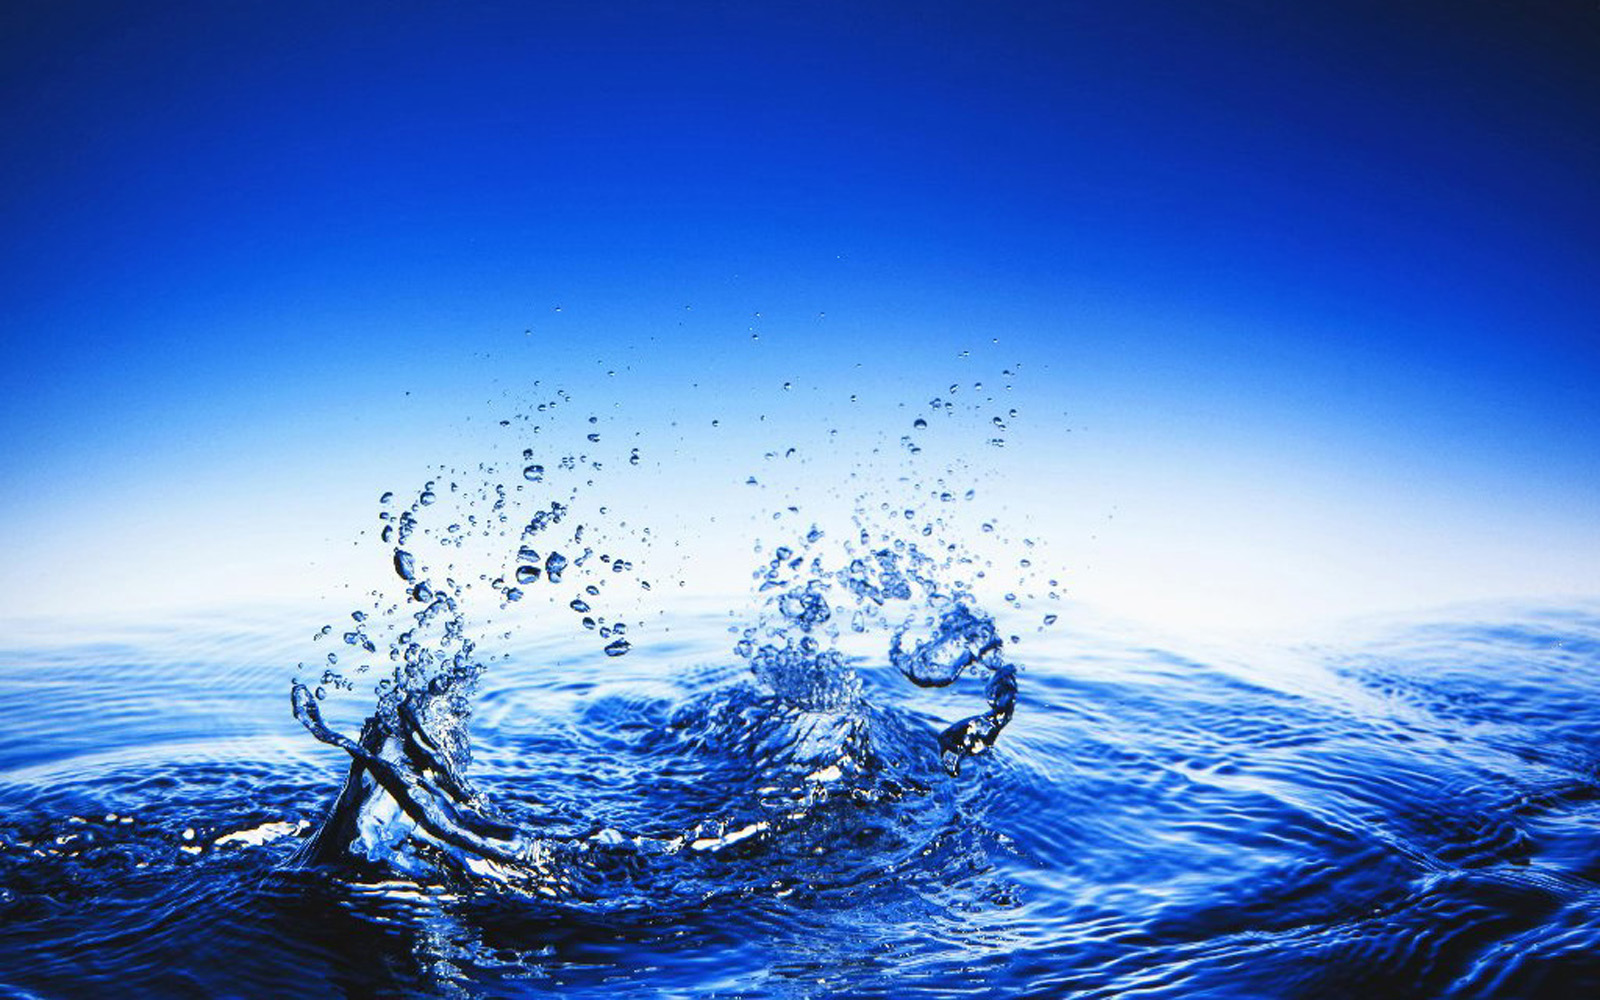 Tag: Water Splash Wallpapers, Images, Photos and Pictures for free